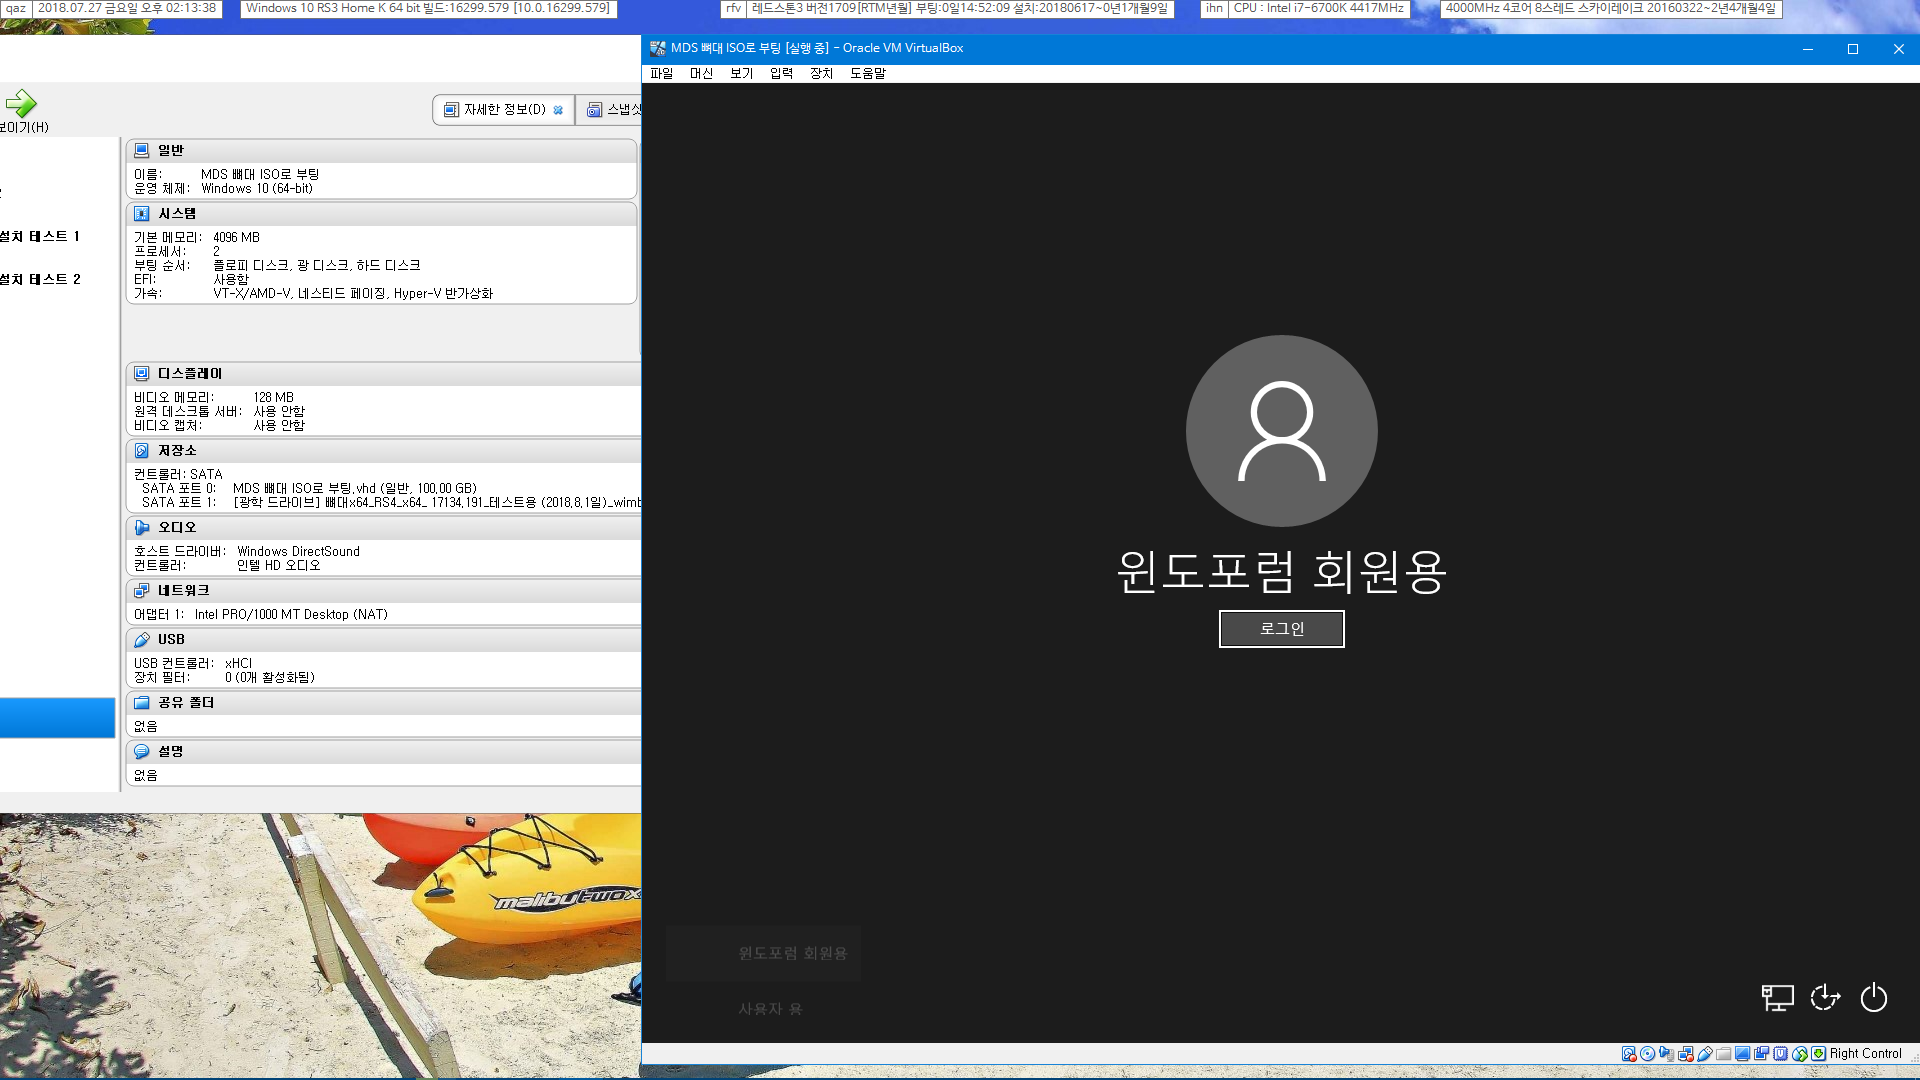 MDS---뼈대x64_RS4_x64_ 17134.191_테스트용 (2018.8.1일)_wimboot-TEST.iso 설치 테스트 - UEFI - 2018-07-27_141338.png